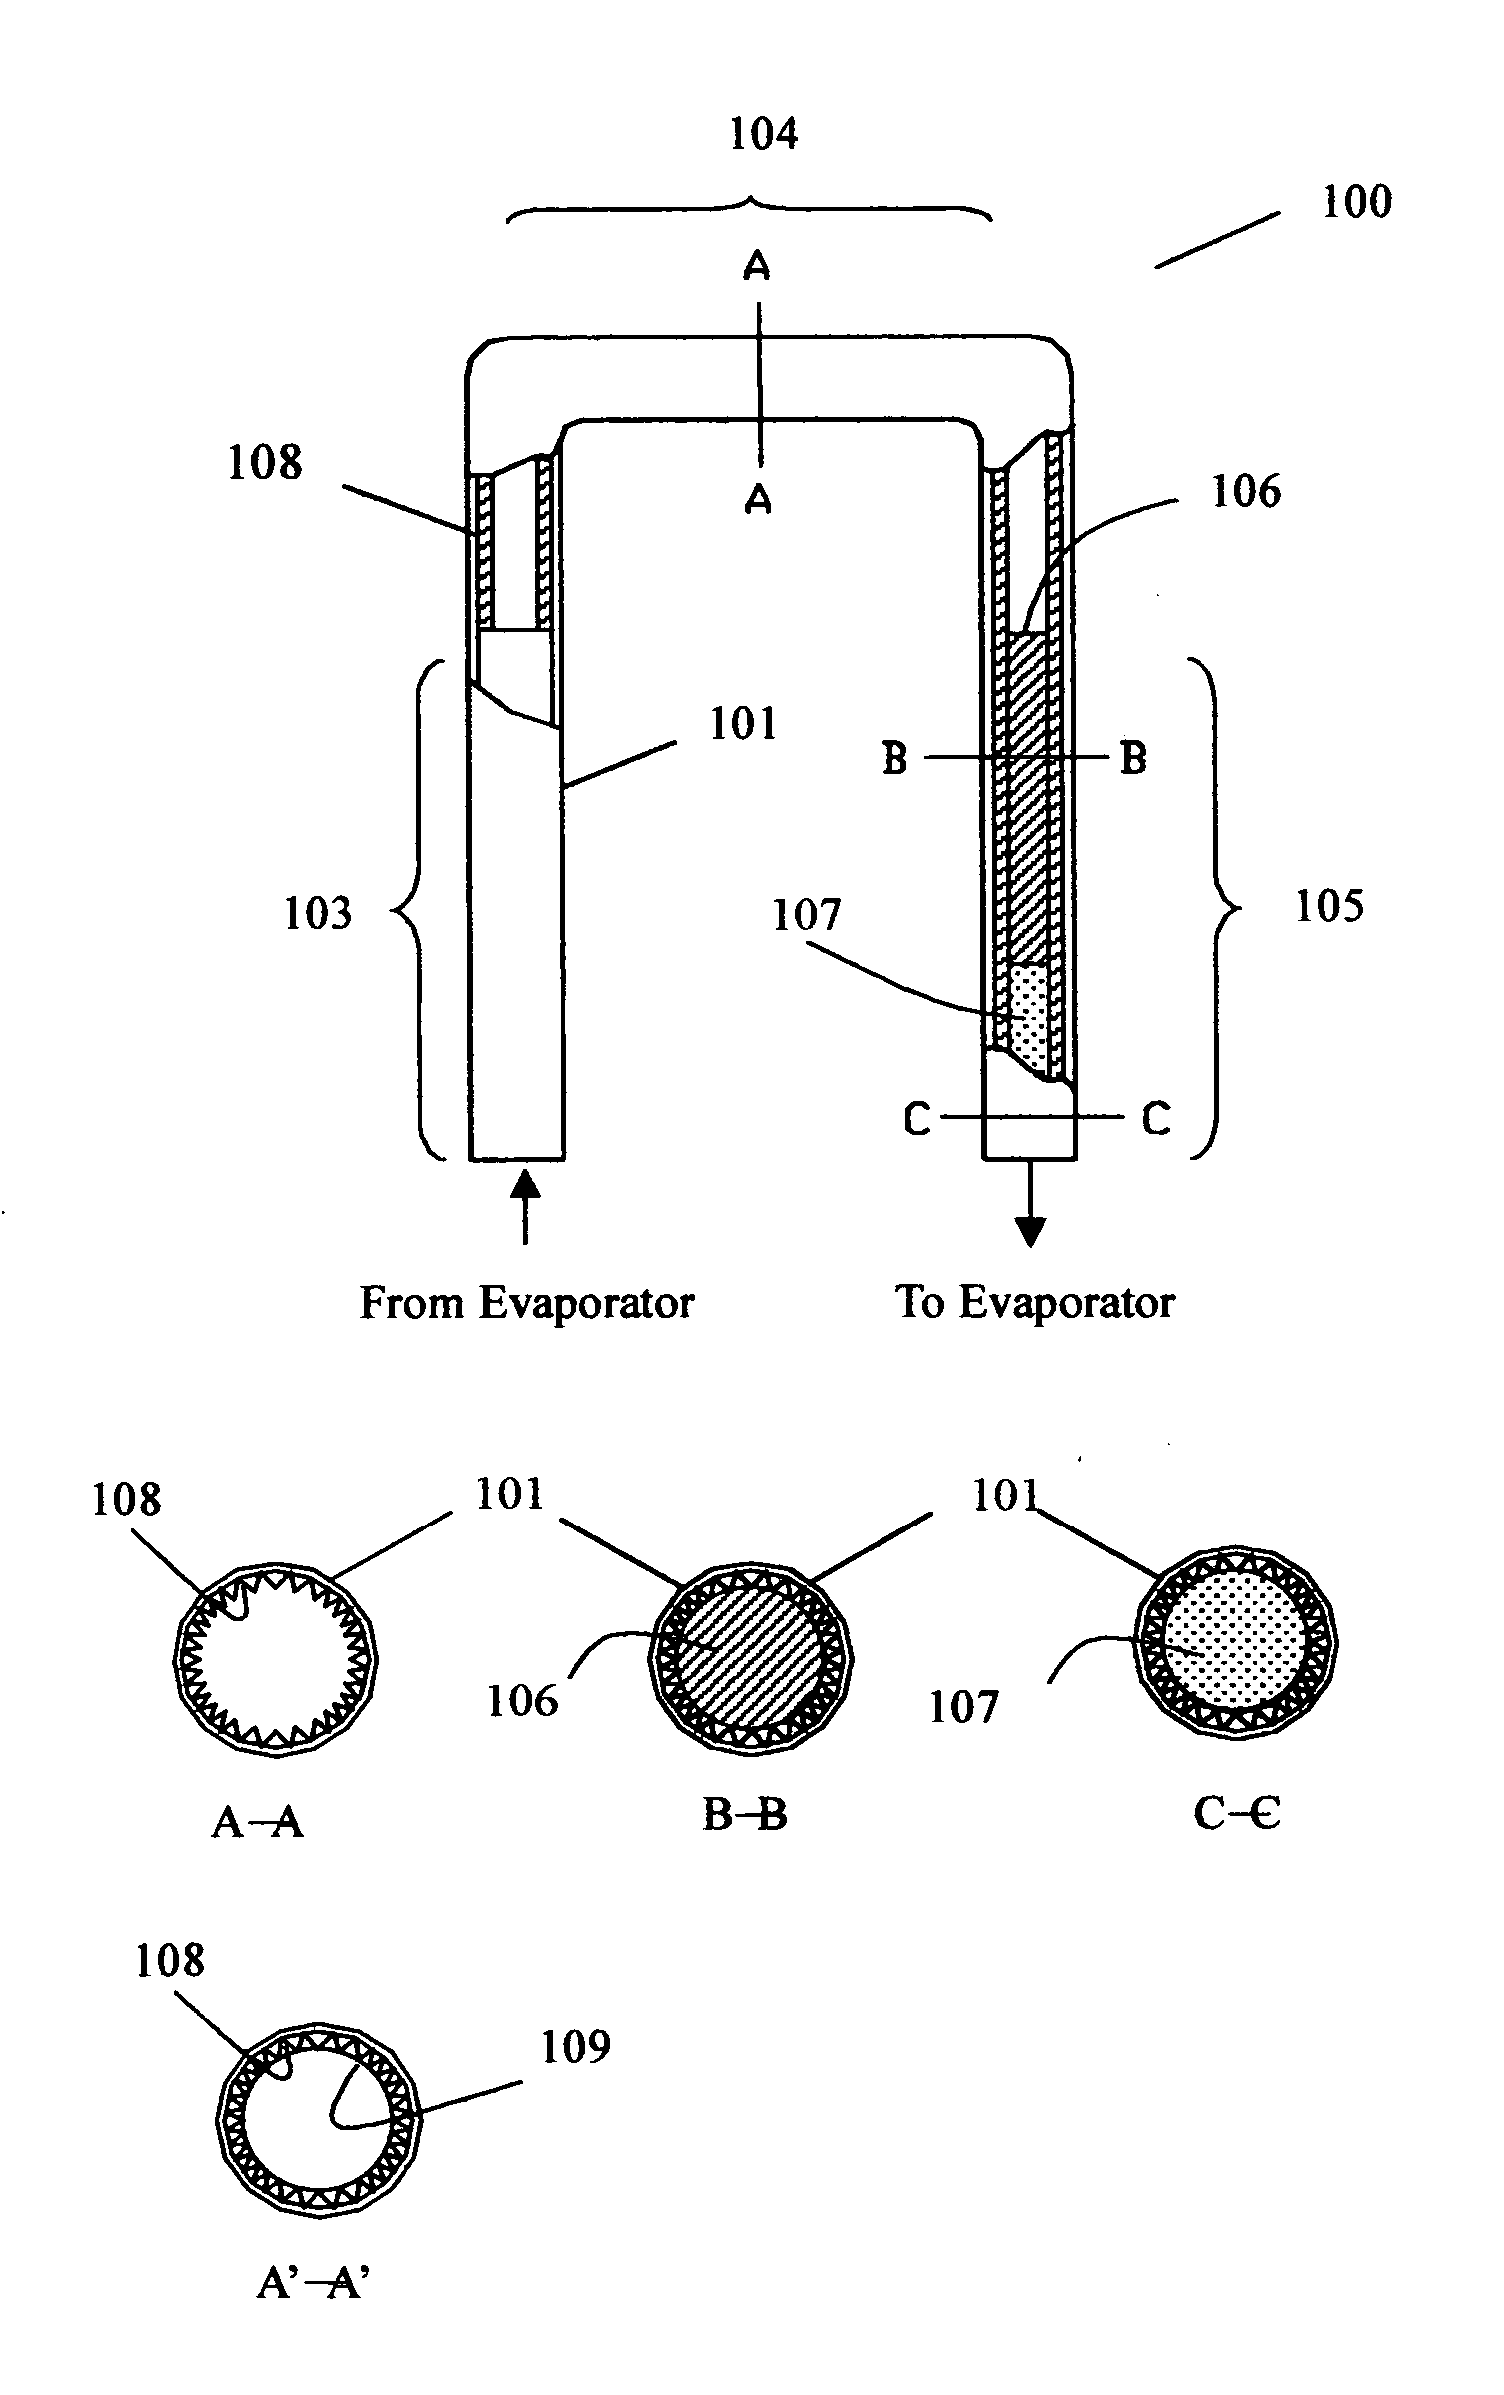 Transport line with grooved microchannels for two-phase heat dissipation on devices